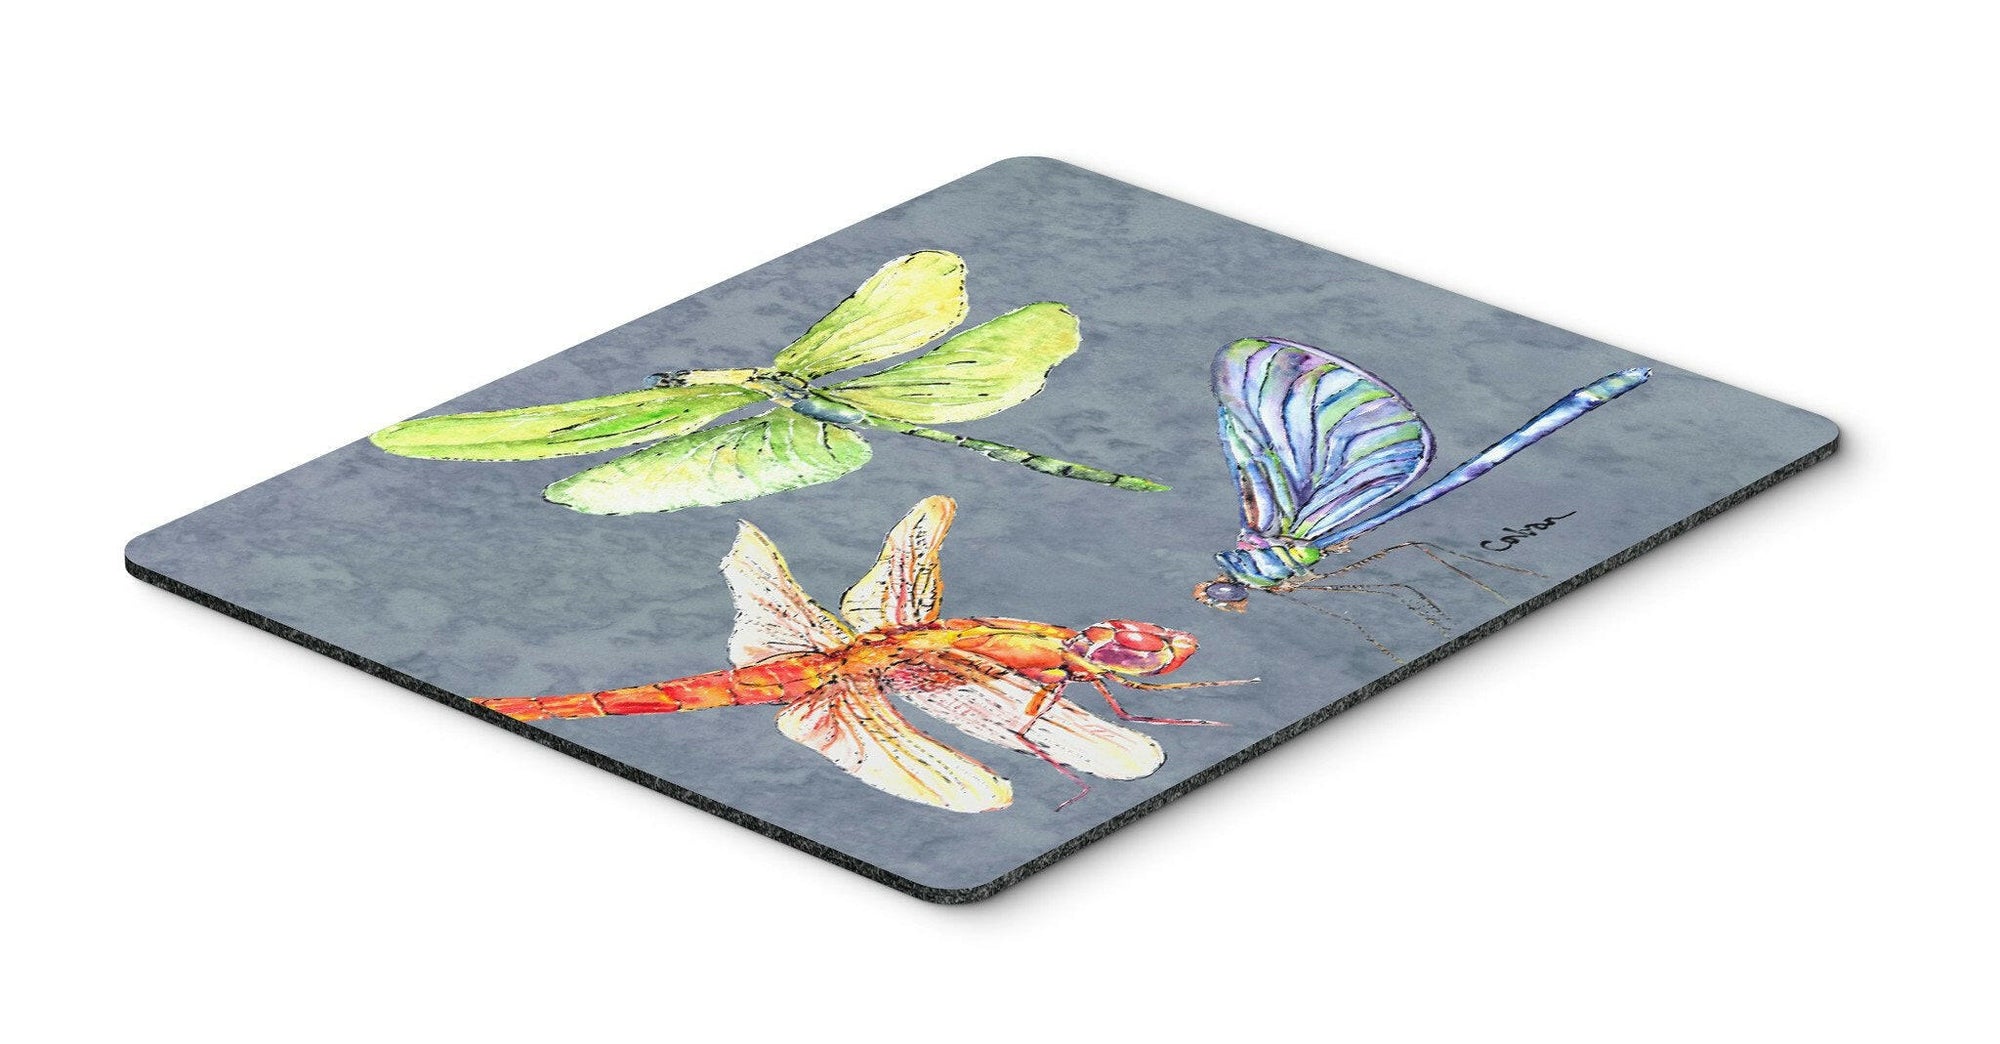 Dragonfly Times Three Mouse Pad, Hot Pad or Trivet by Caroline's Treasures